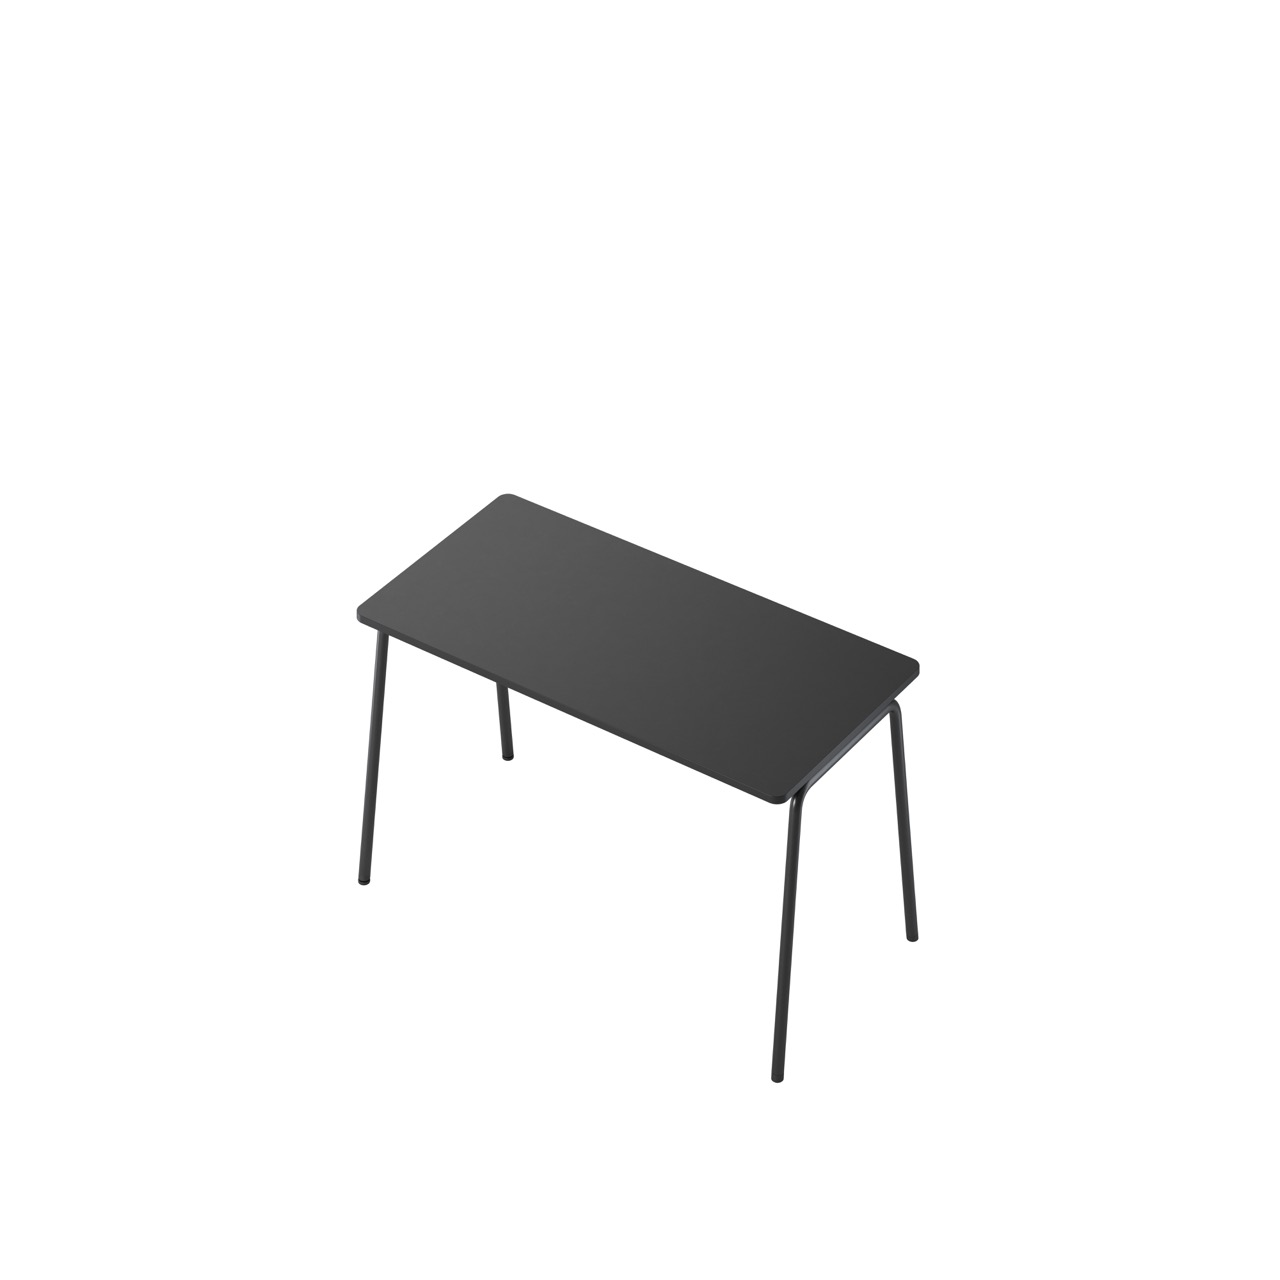 OCEE&FOUR - Tables - FourReal 74 - 140 x 70 - Angled - Packshot Image 2 Large